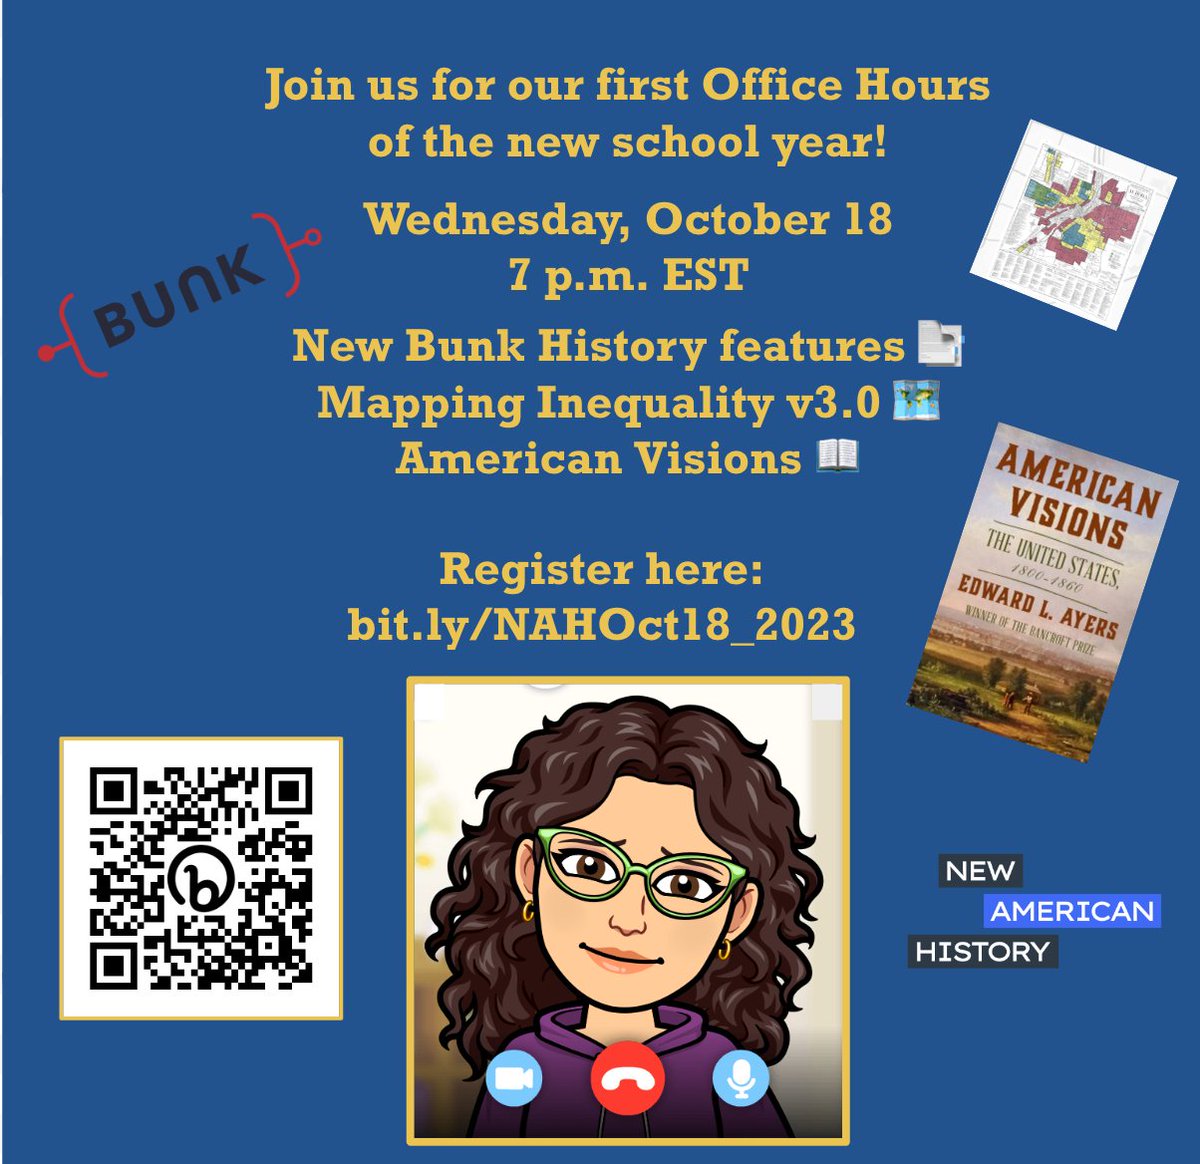 Join our own @MapM8ker for our first Office Hours session of the new school year! Check out some new features on @bunkhistory, and get a sneak peek @HOLCRedlining v3.0 & @edward_l_ayers new book. Register here: bit.ly/NAHOct18_2023 Hope to see you there-bring friends!